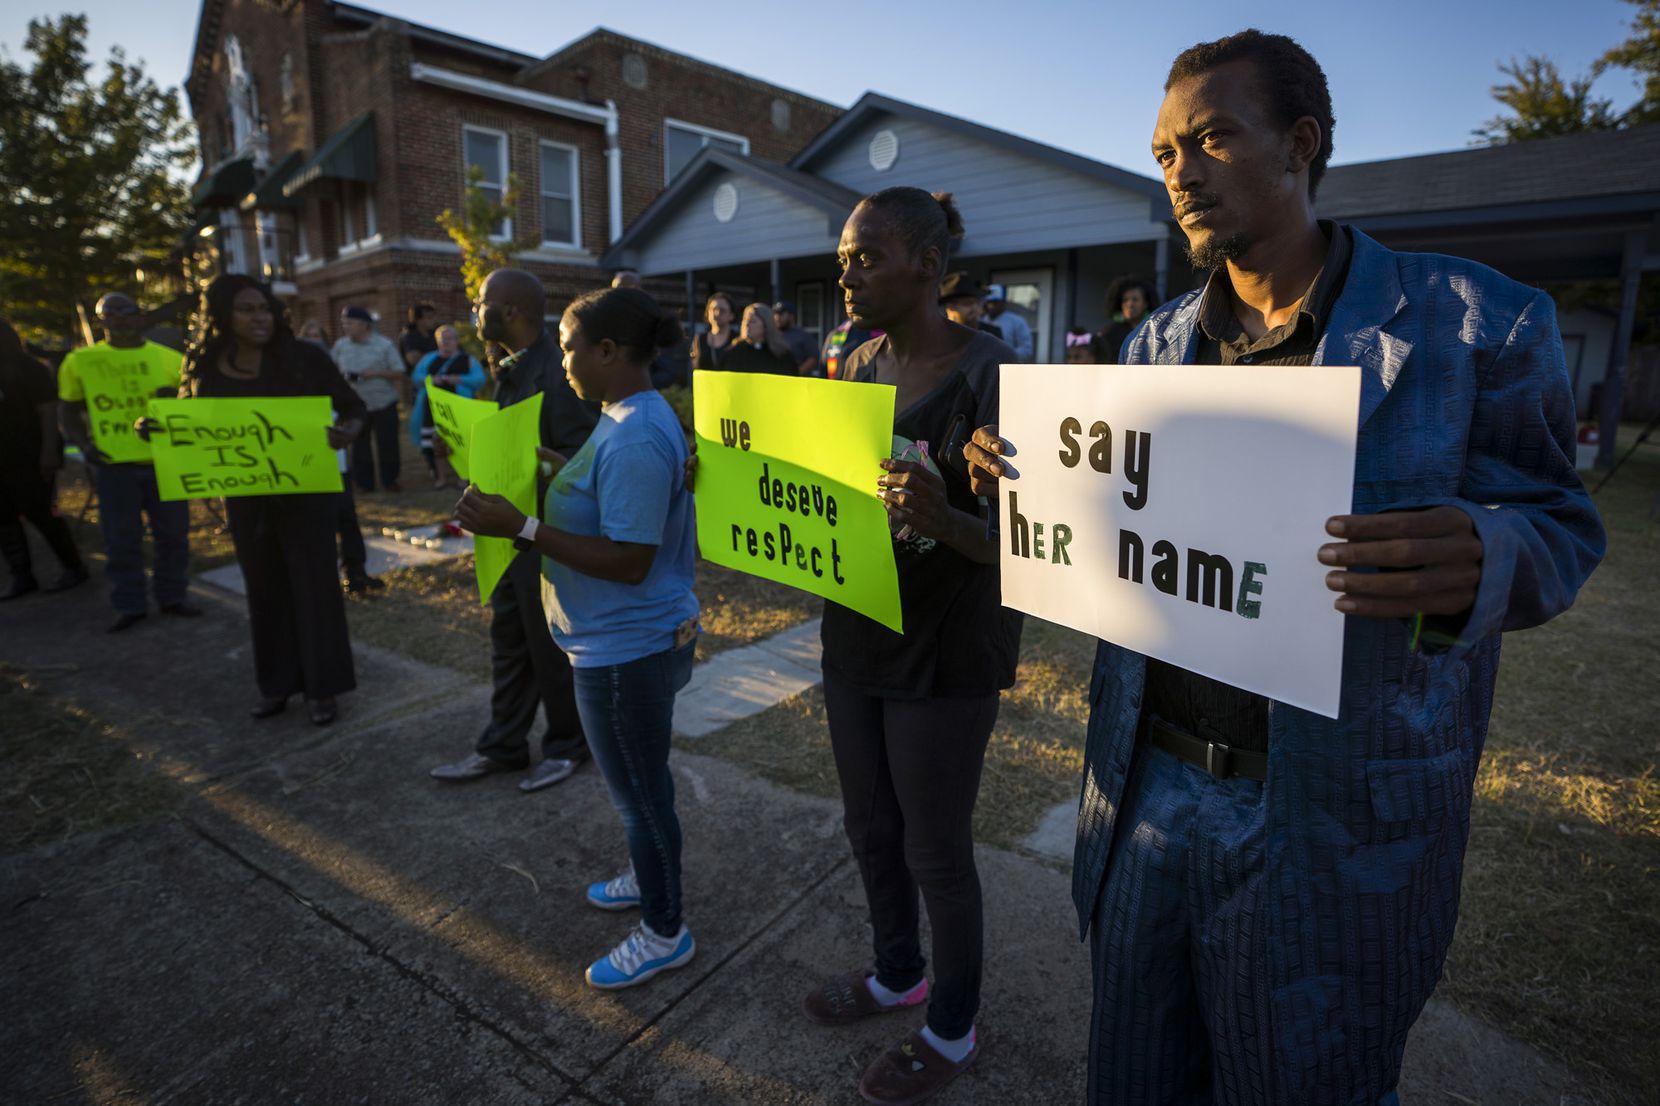 Protestors gather outside the house (right) where Atatiana Jefferson was shot and killed, during a community vigil for Jefferson on Sunday, Oct. 13, 2019, in Fort Worth, Texas.  Jefferson, a 28-year-old black woman, was shot in her home by a white Fort Worth police officer during a welfare check.